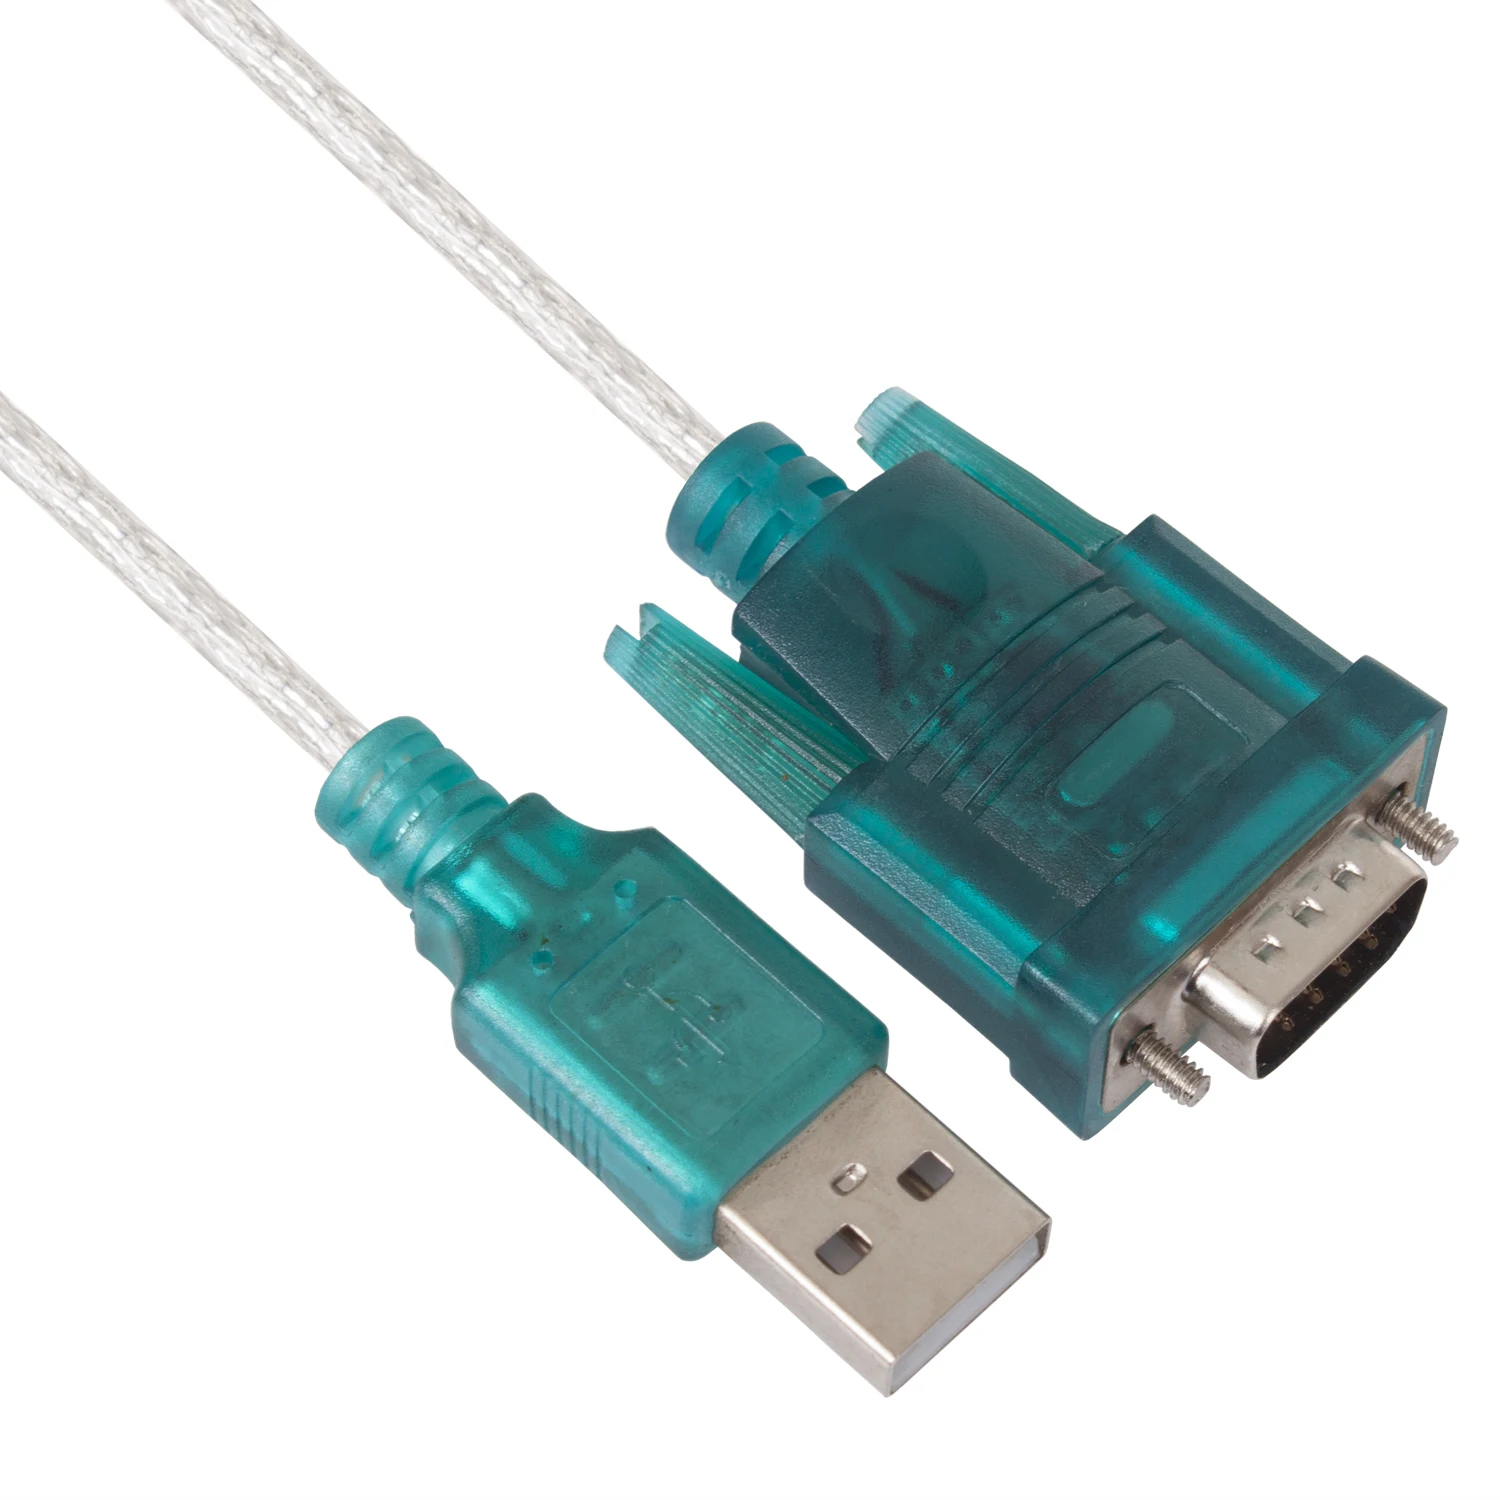 zoom galop animation Source VCOM USB to RS232 USB Serial Adapter with IC Chipset USB 2.0 to Male  Serial Cable 1.2m 4ft for Windows Vista XP Linux and Mac OS on m.alibaba.com